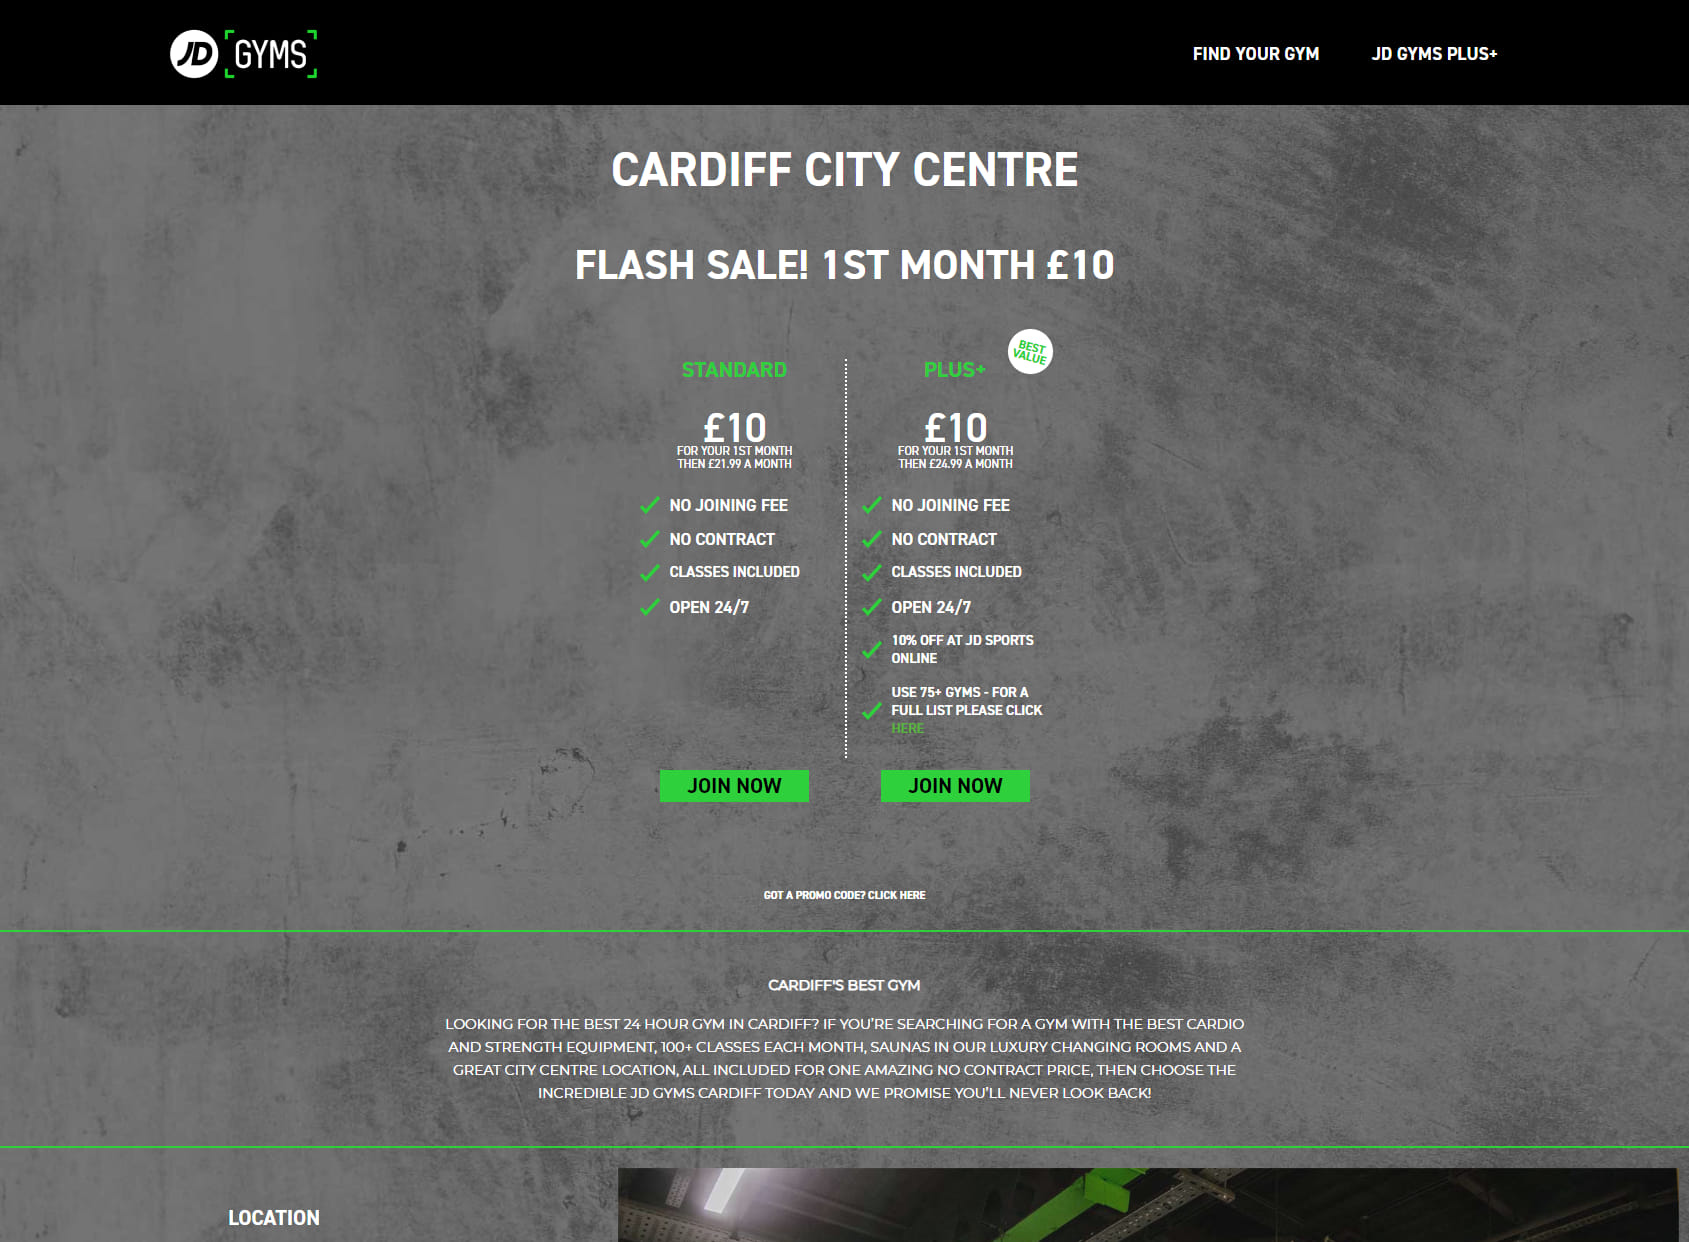 JD Gyms Cardiff City Centre